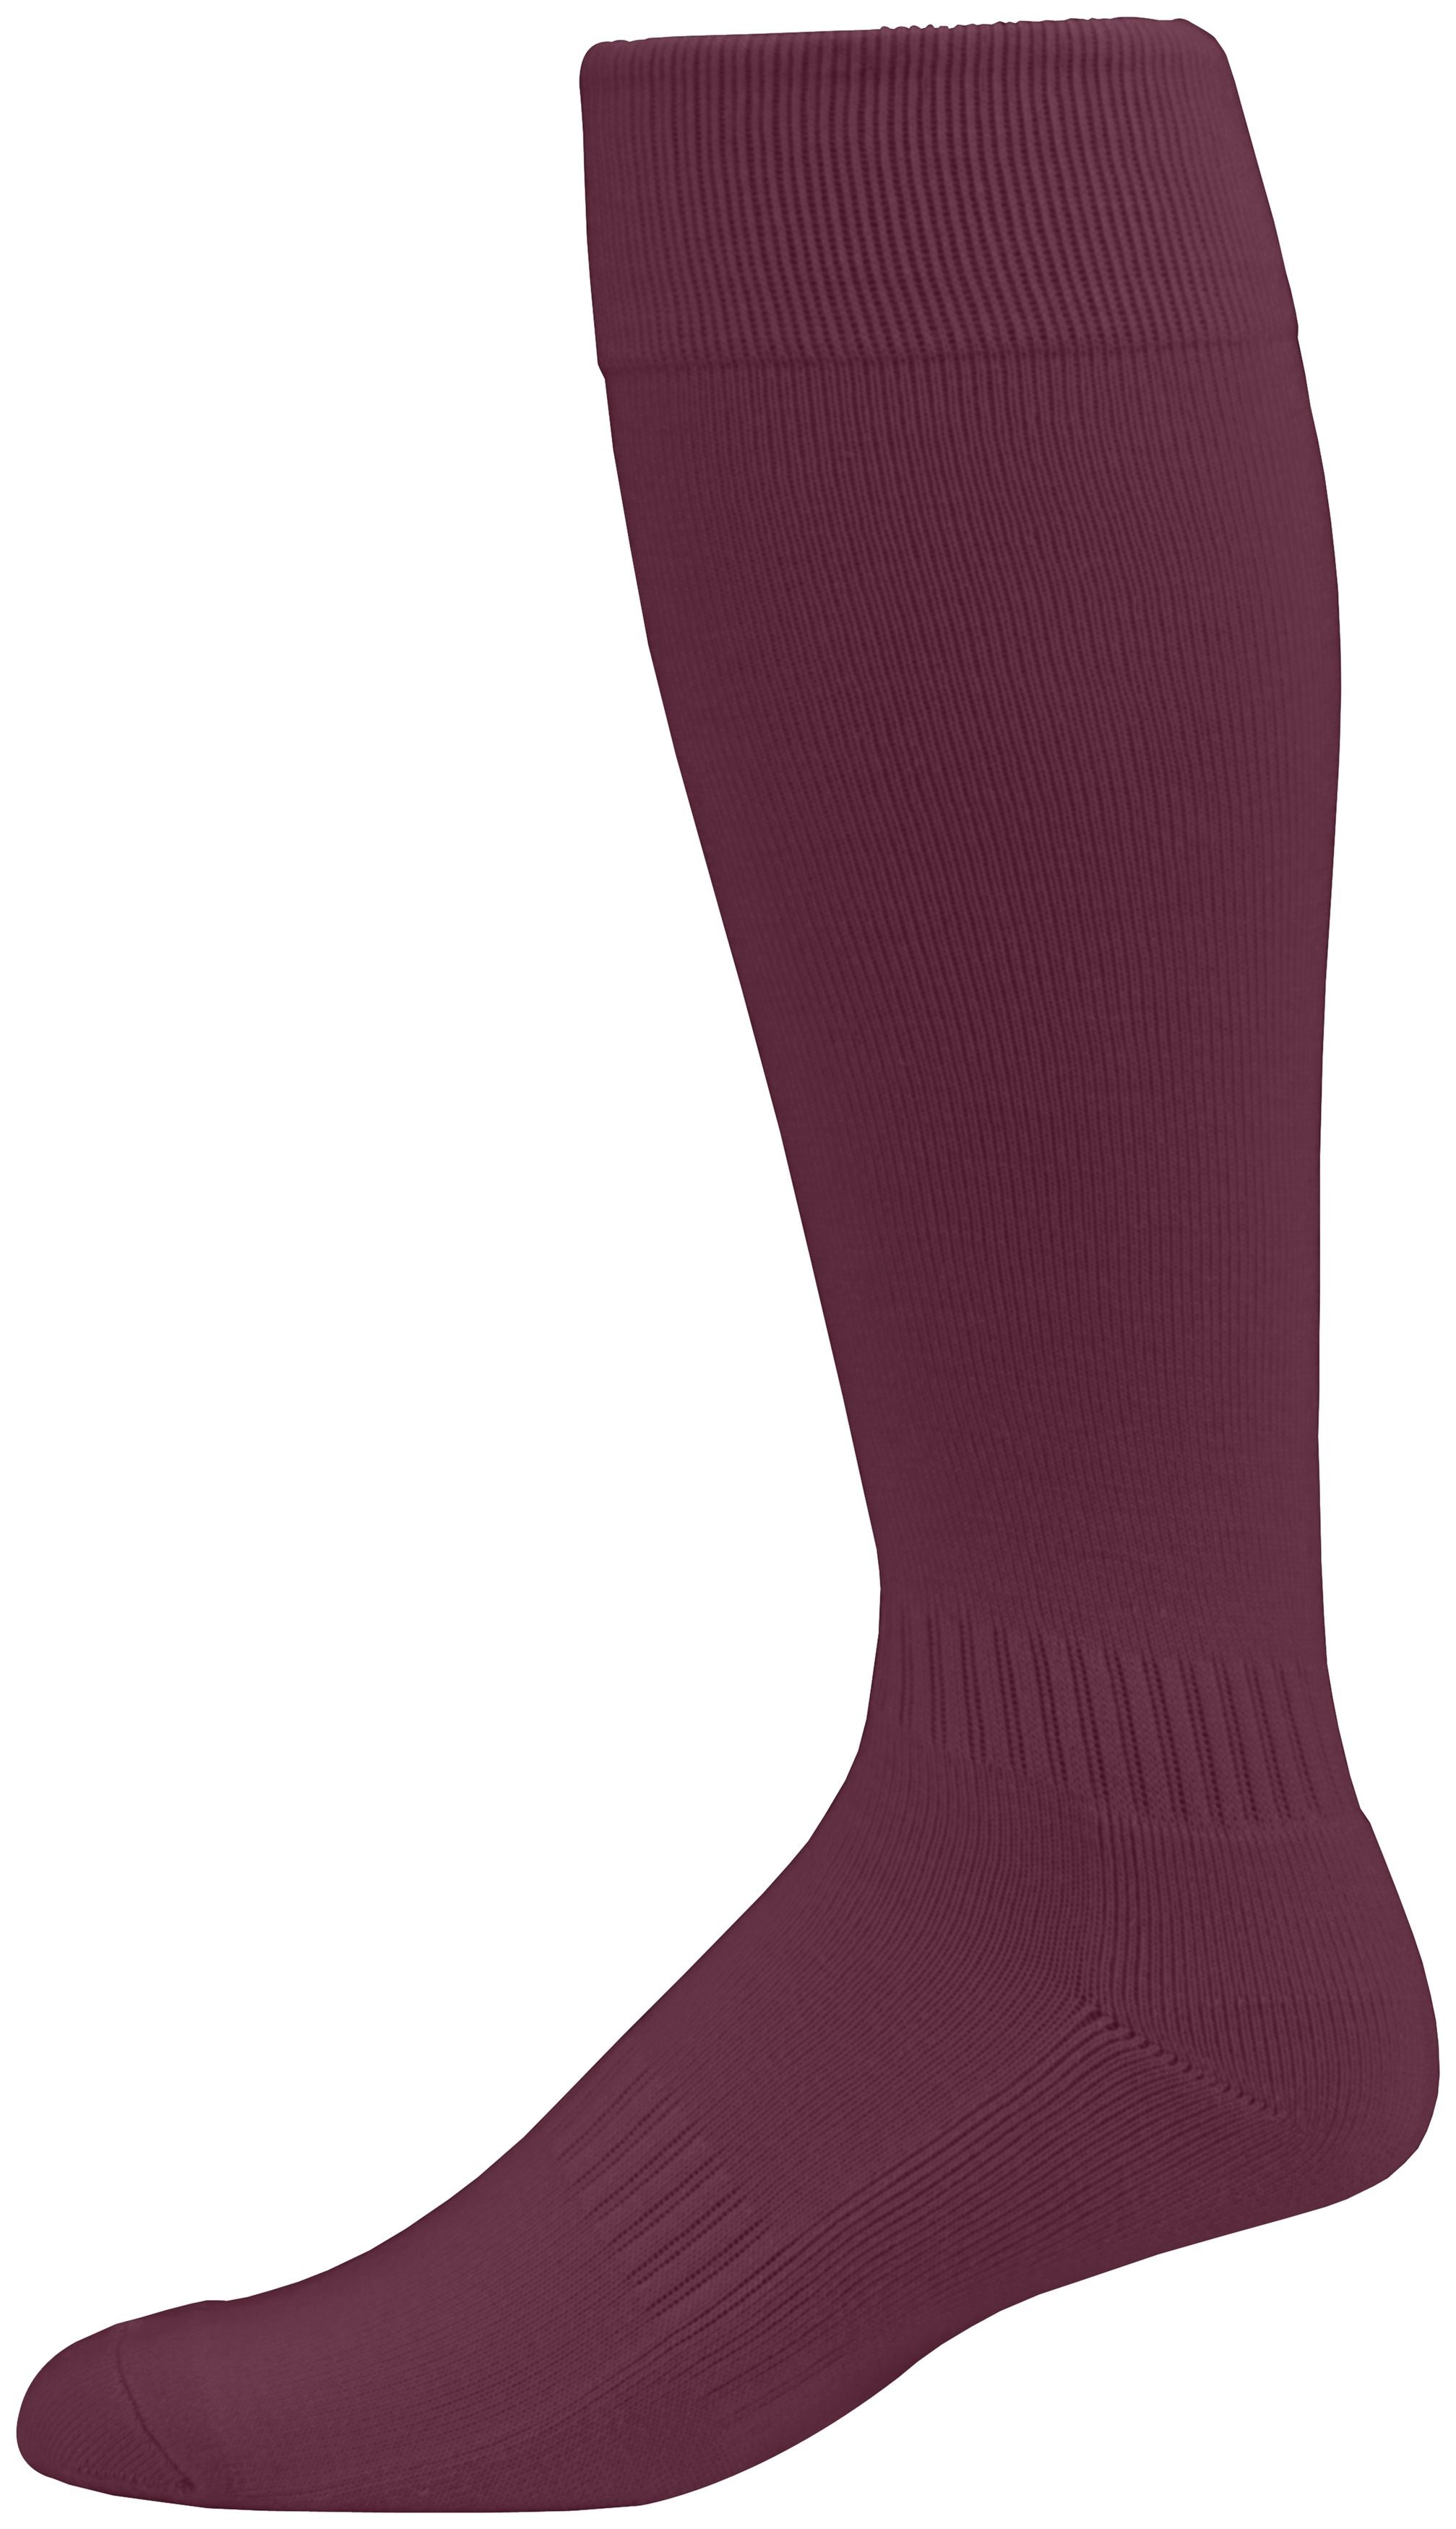 Augusta Sportswear Elite Multi-Sport Sock in Maroon  -Part of the Accessories, Augusta-Products, Accessories-Socks product lines at KanaleyCreations.com